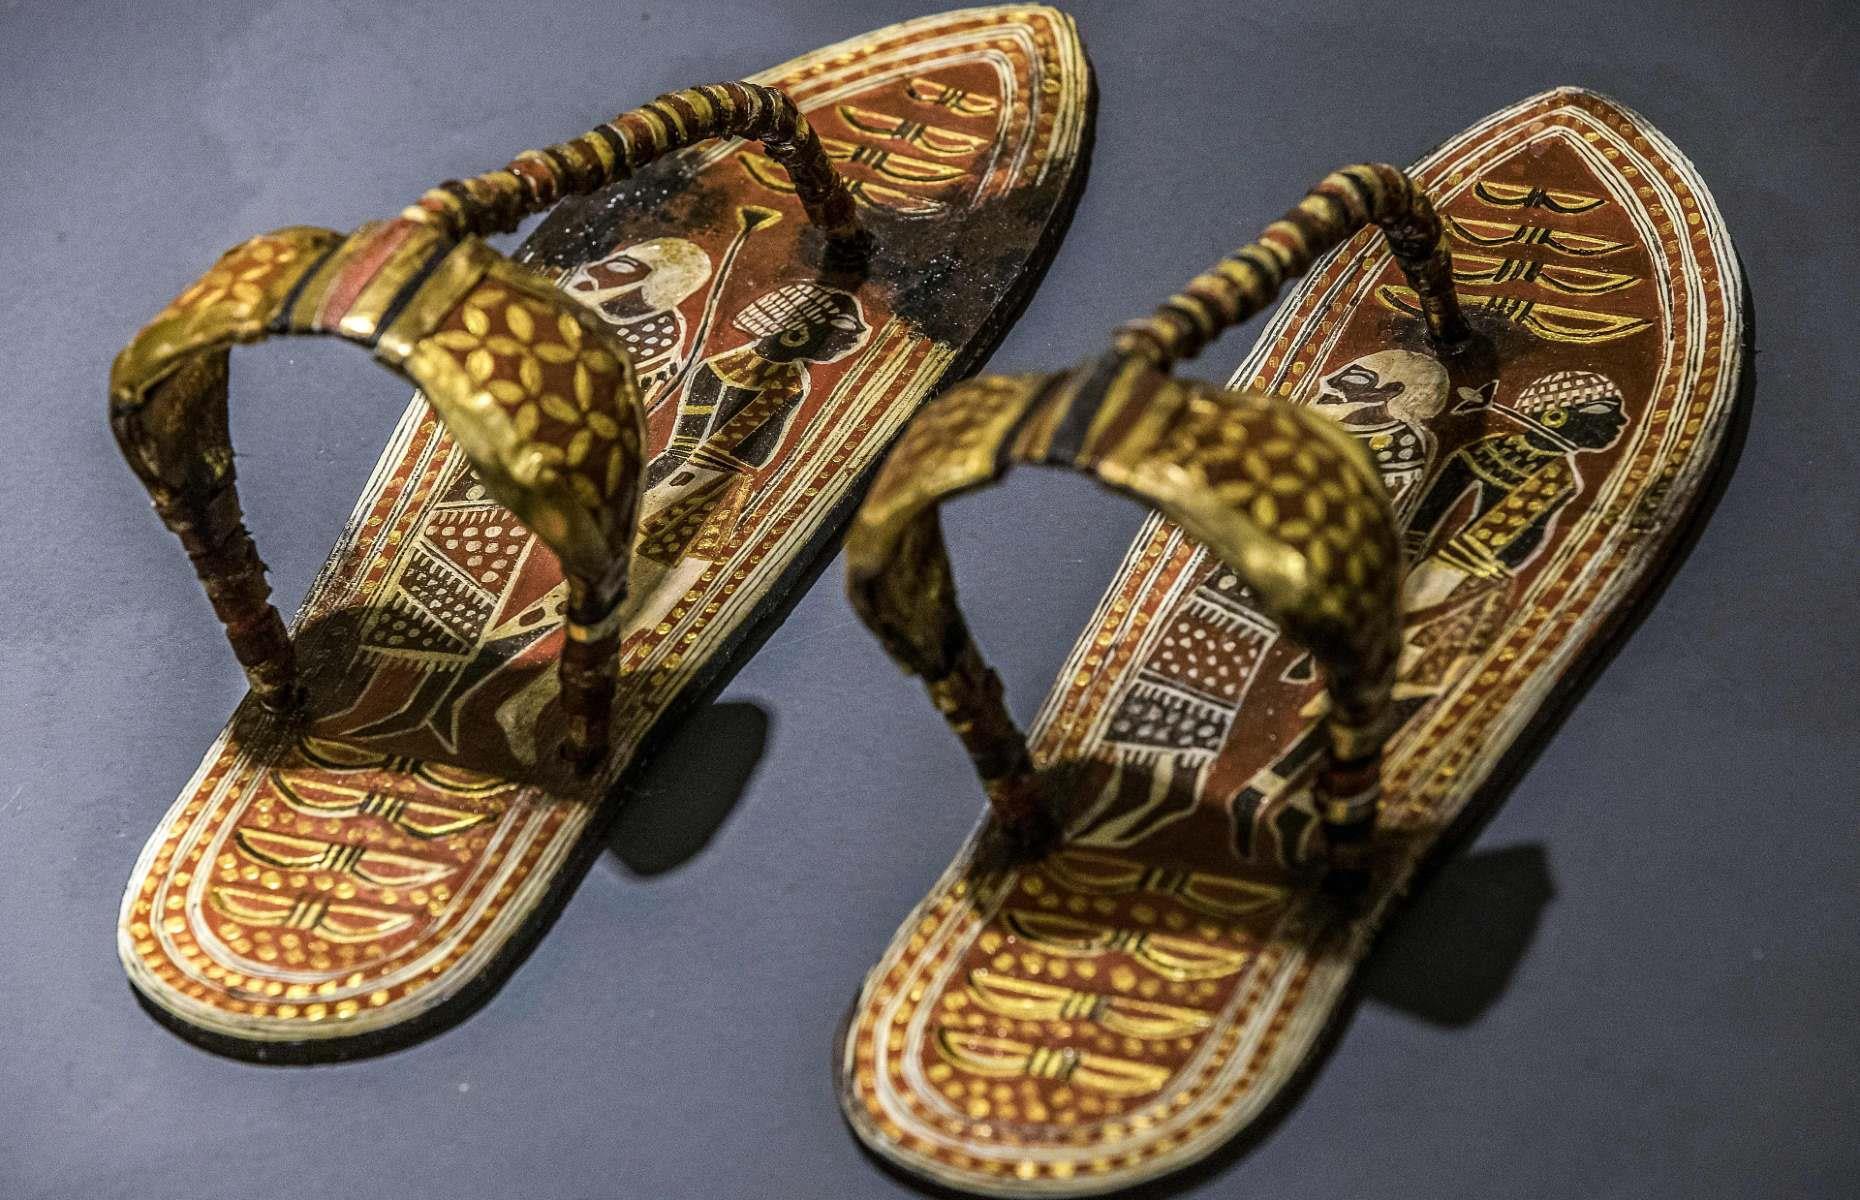 <p>Sandals and toe stalls (golden toe coverings) were discovered on many Egyptian mummies, including Tutankhamun. Pictured here is a replica of a pair recovered from King Tut's tomb, where some 80 pairs were found in total. These funerary items served symbolic purposes; on each sole are figures and arches representing Egypt’s nine traditional enemies, which the pharaoh symbolically trod on.</p>